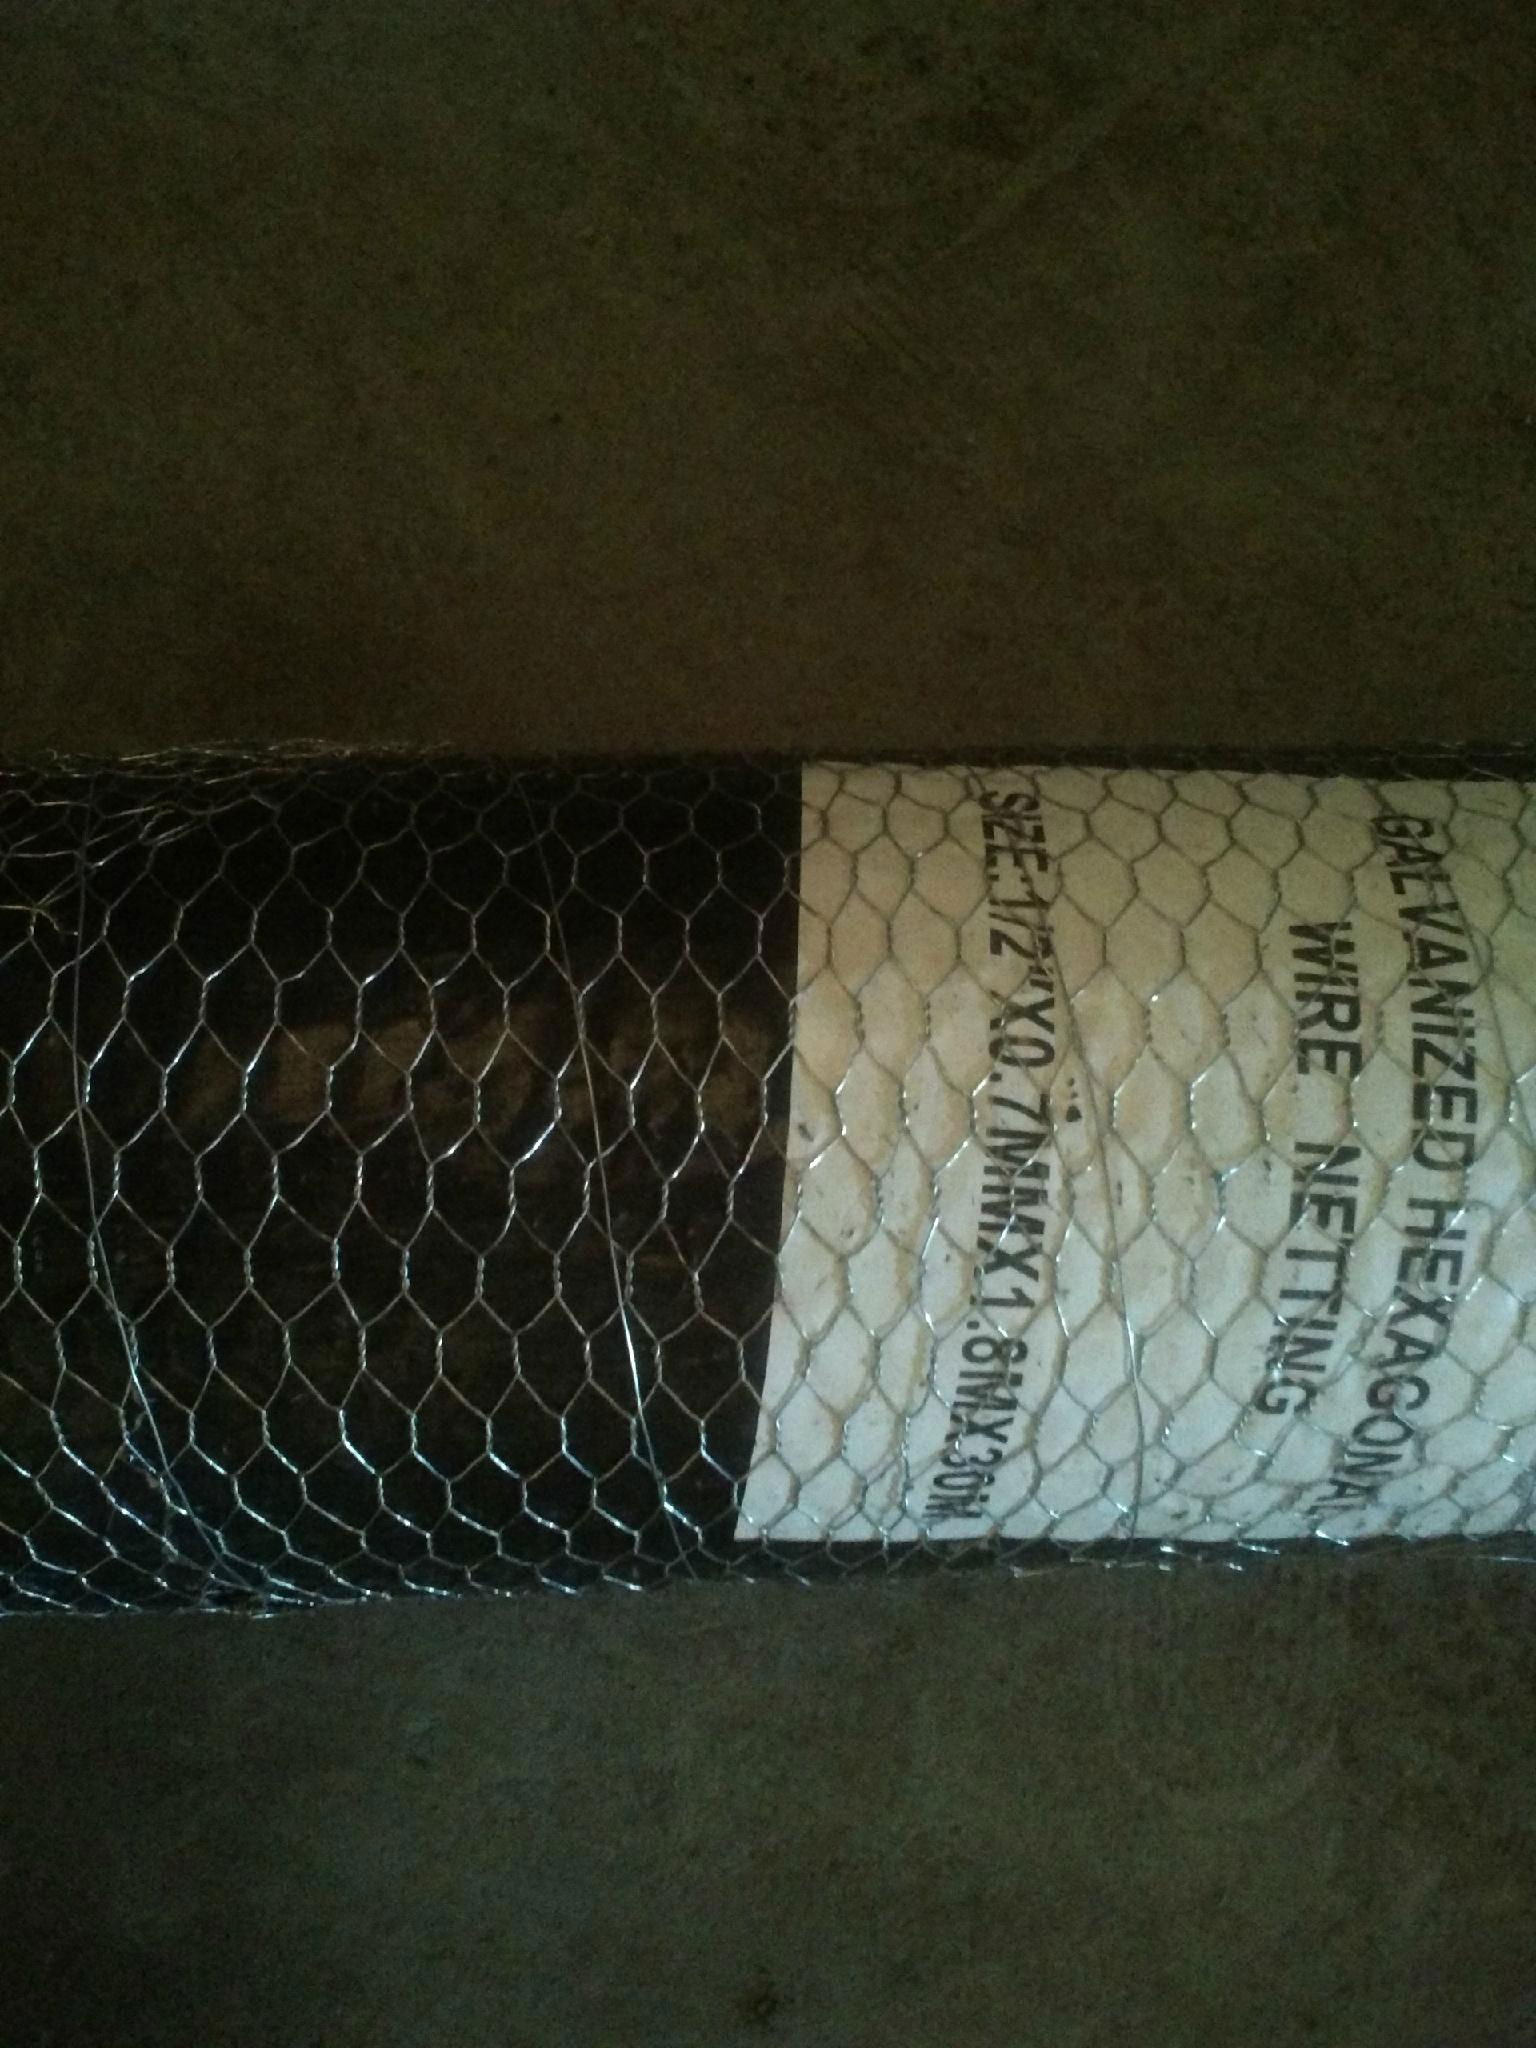 chicken wire made by China manufacturer with cheap price and high quantity 4